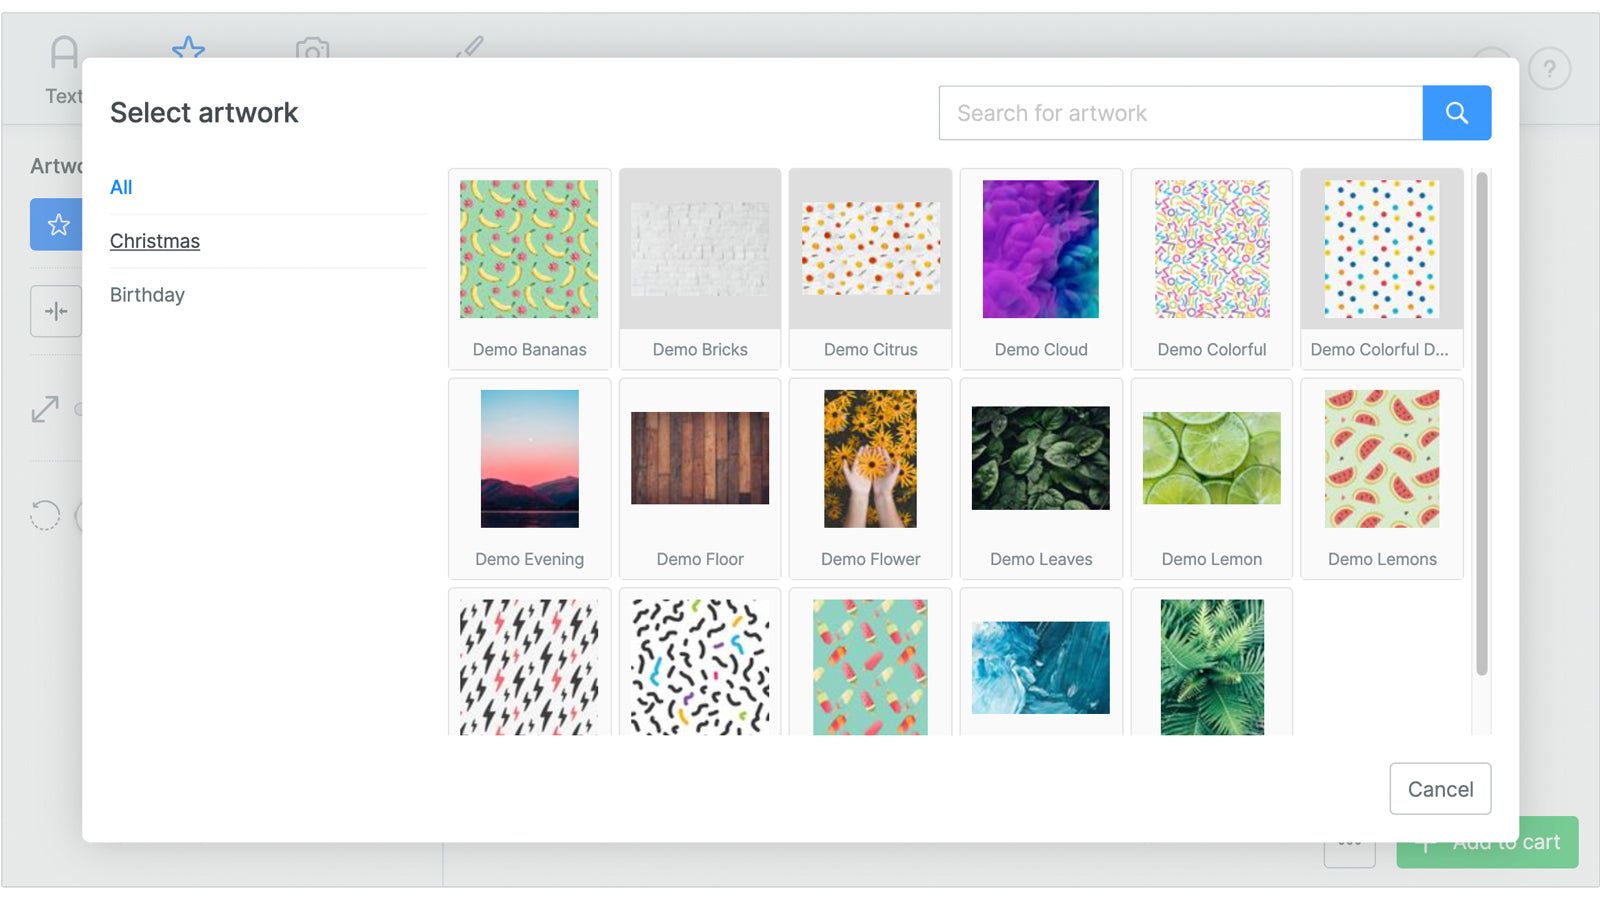 Offer a collection of categorized artwork to your customers